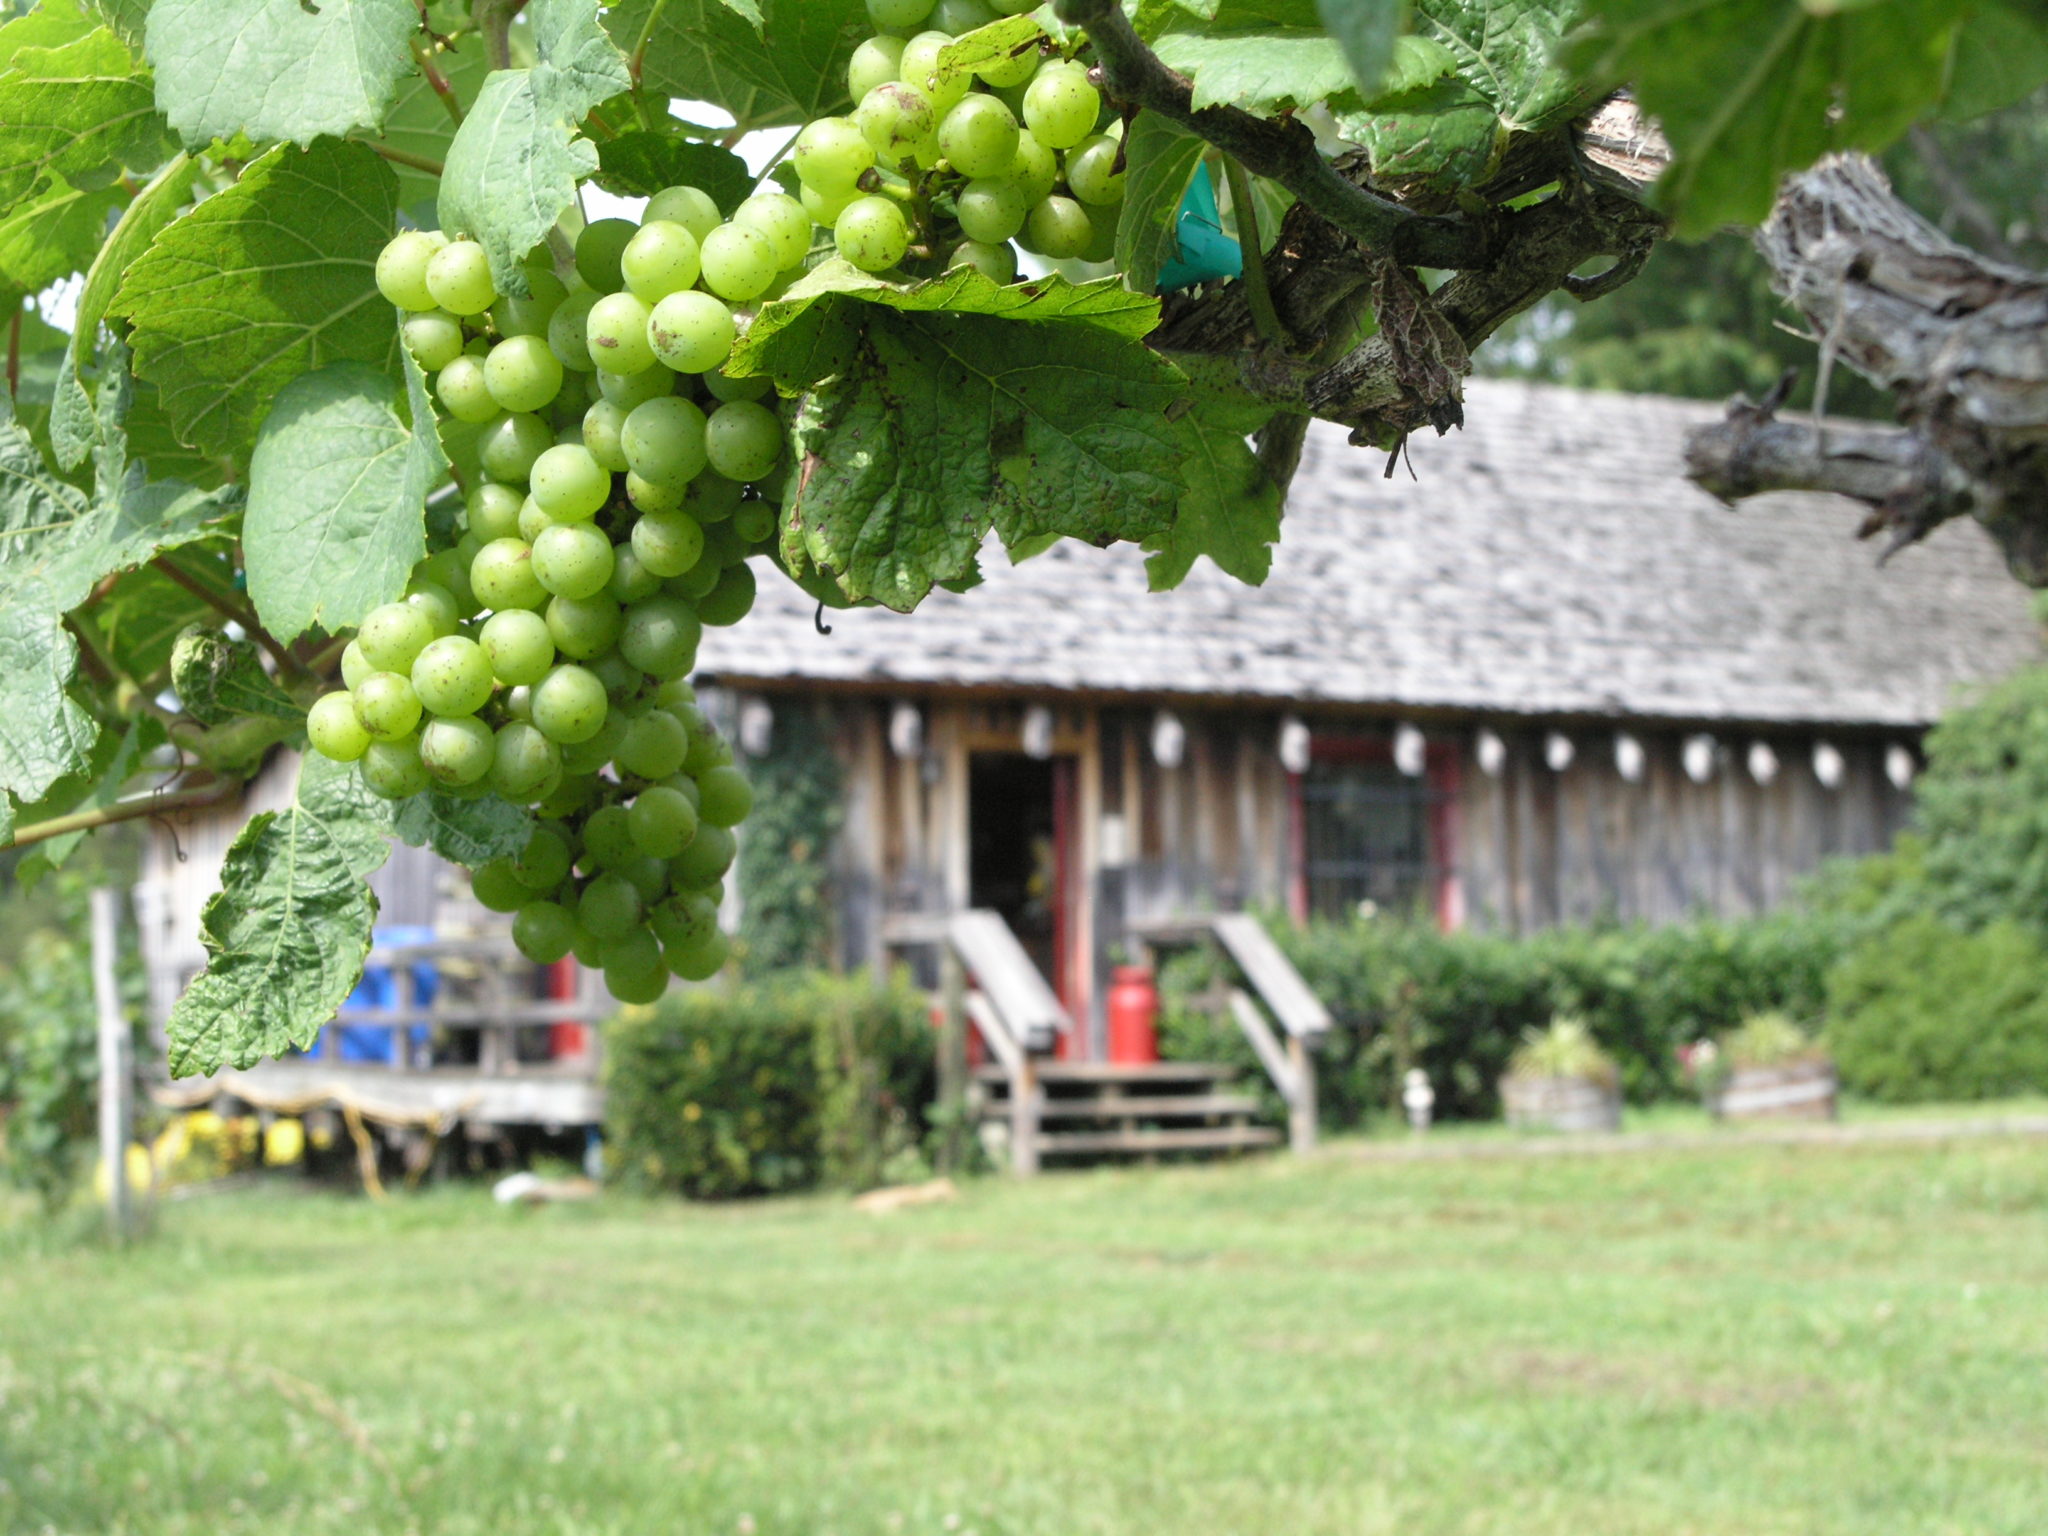 Grapes and a Farm